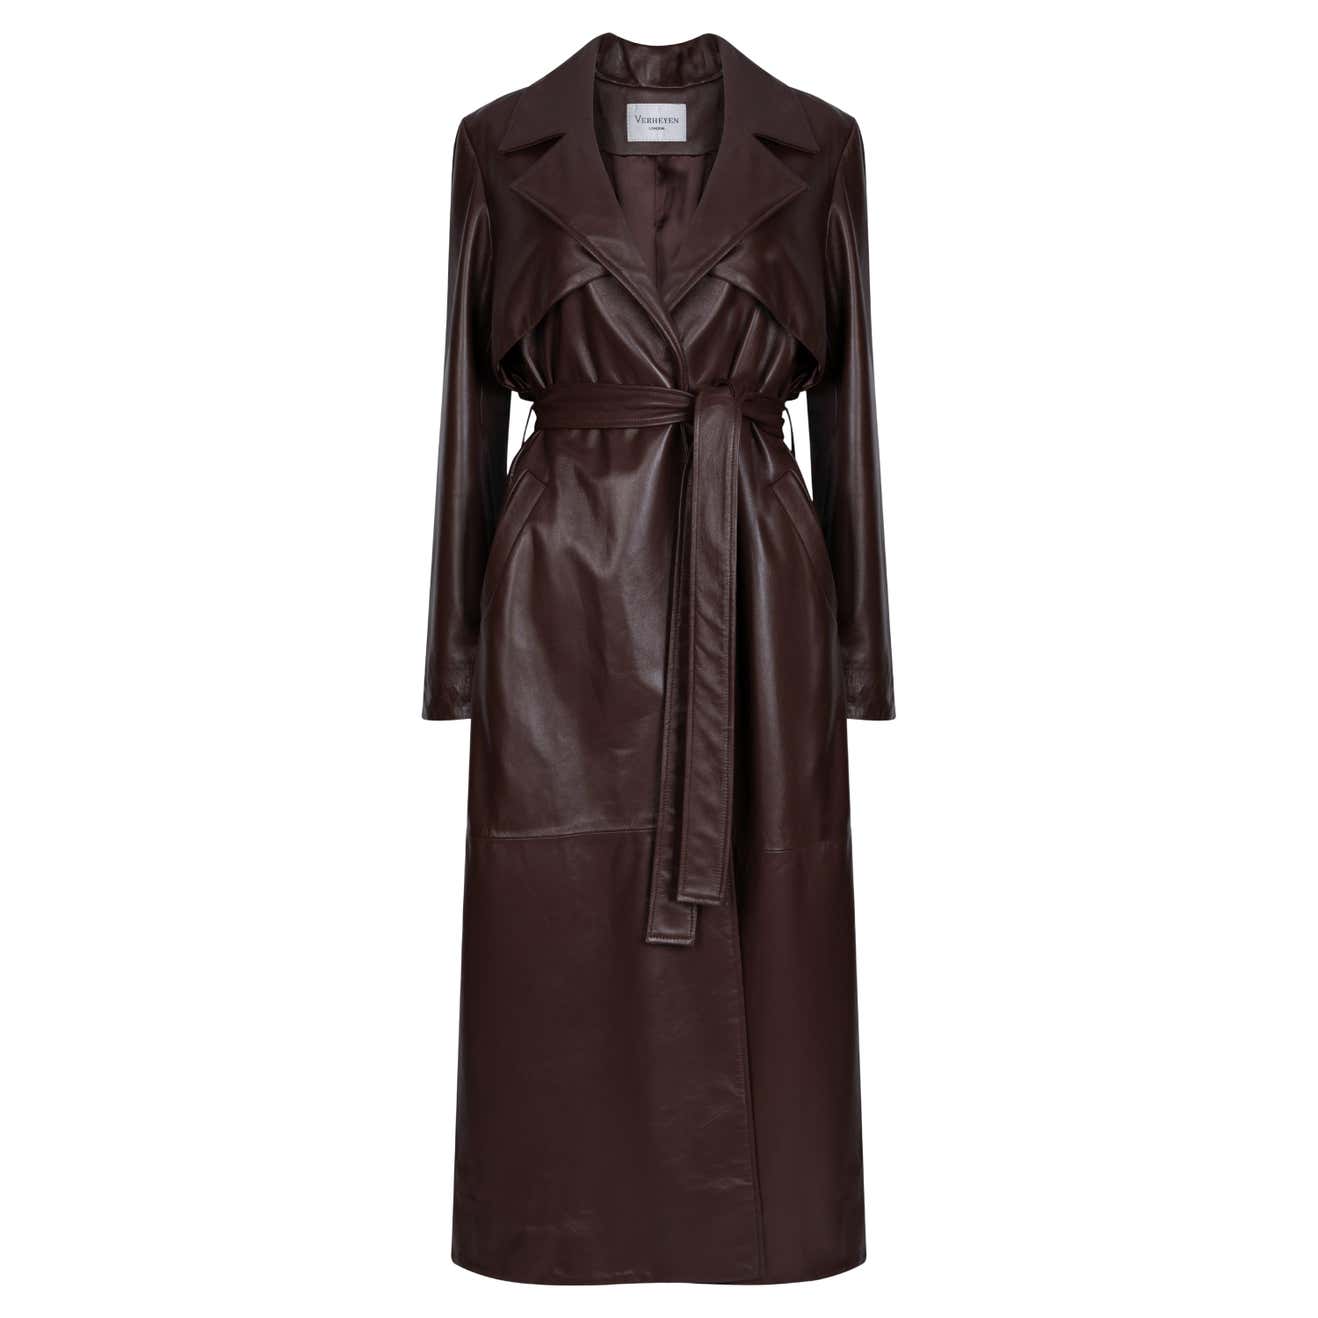 Verheyen London Leather Trench Coat in Chocolate Brown - Size uk 10 For ...